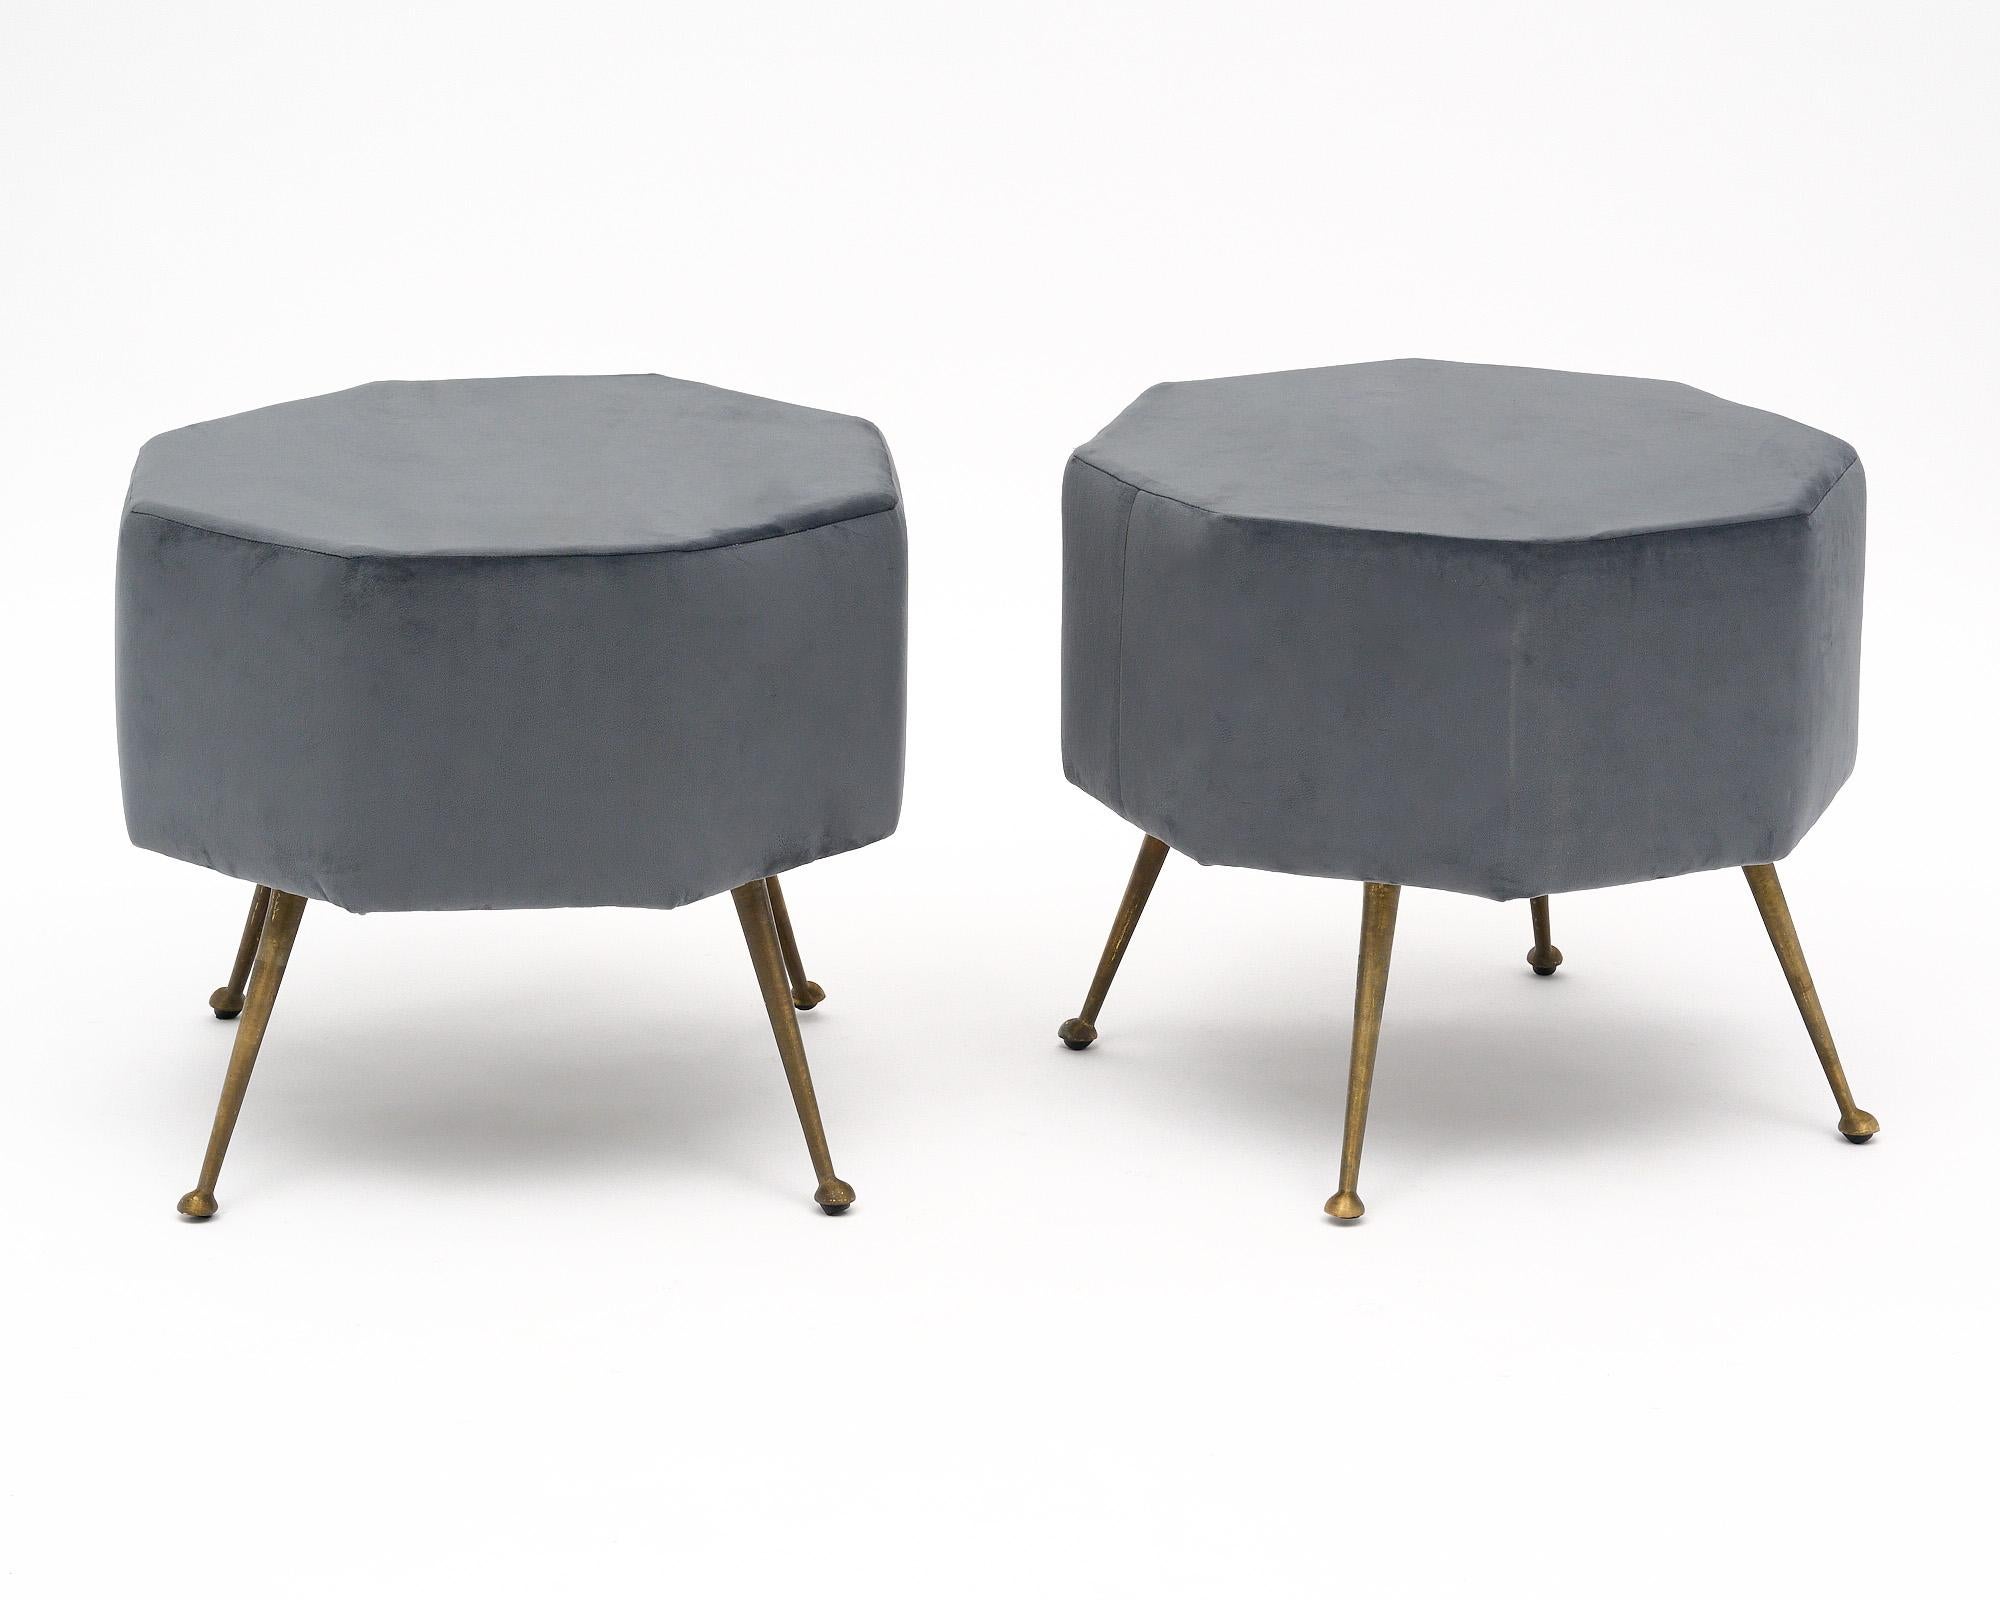 Pair of Italian mid-century modern stools that have been newly upholstered in a gray colored micro fiber. Four original tapered, flared brass legs support the seat. The seat has an octagonal shape.
